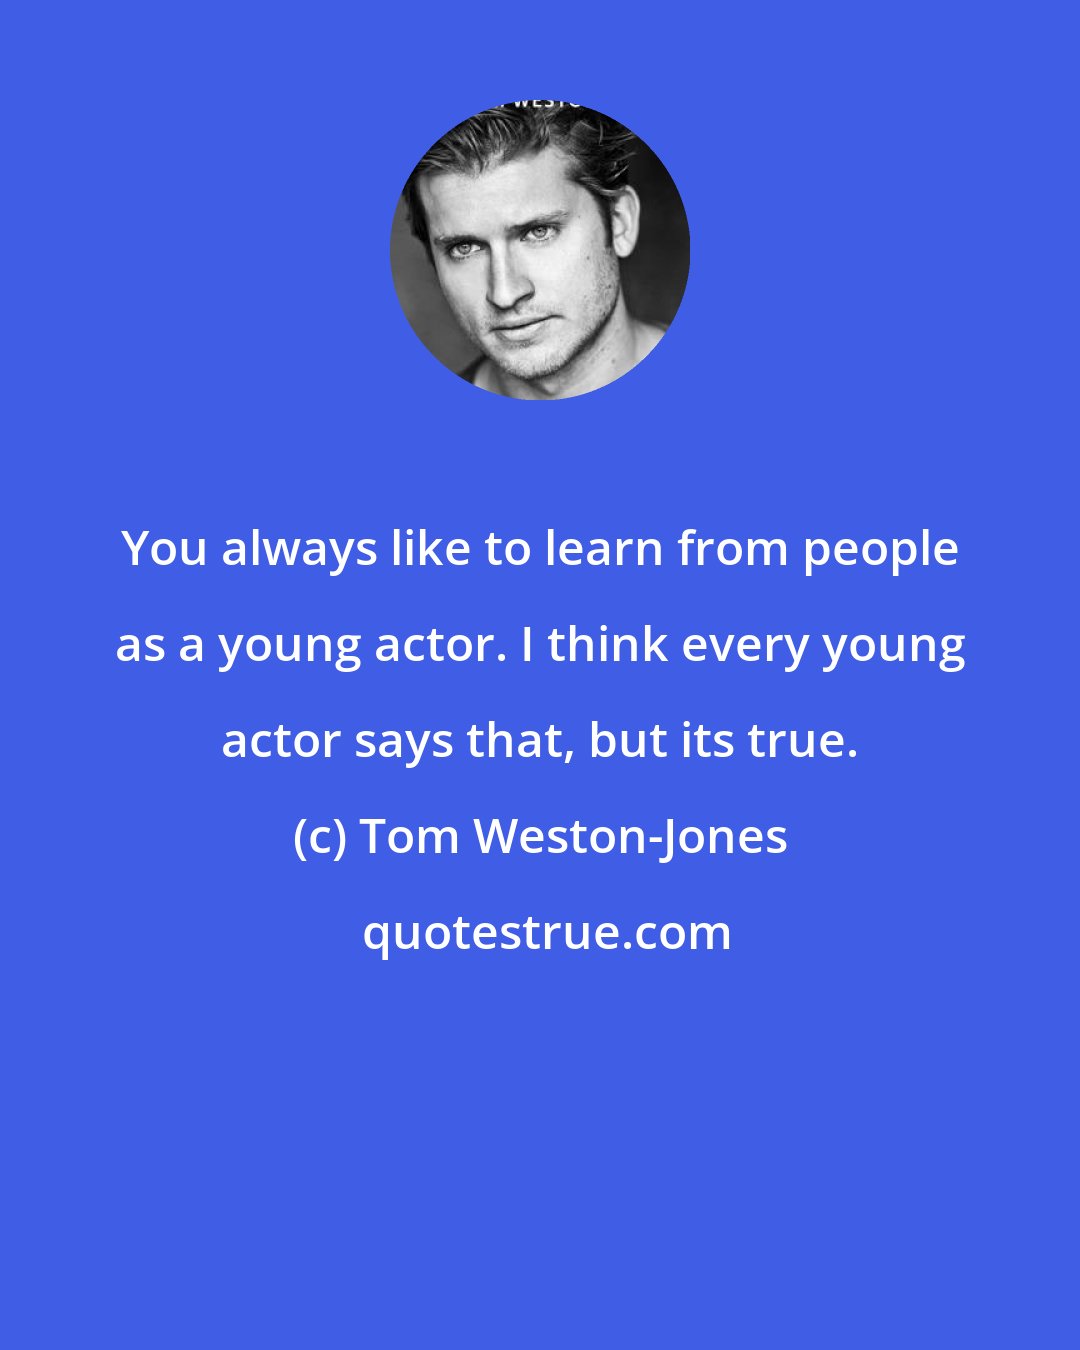 Tom Weston-Jones: You always like to learn from people as a young actor. I think every young actor says that, but its true.